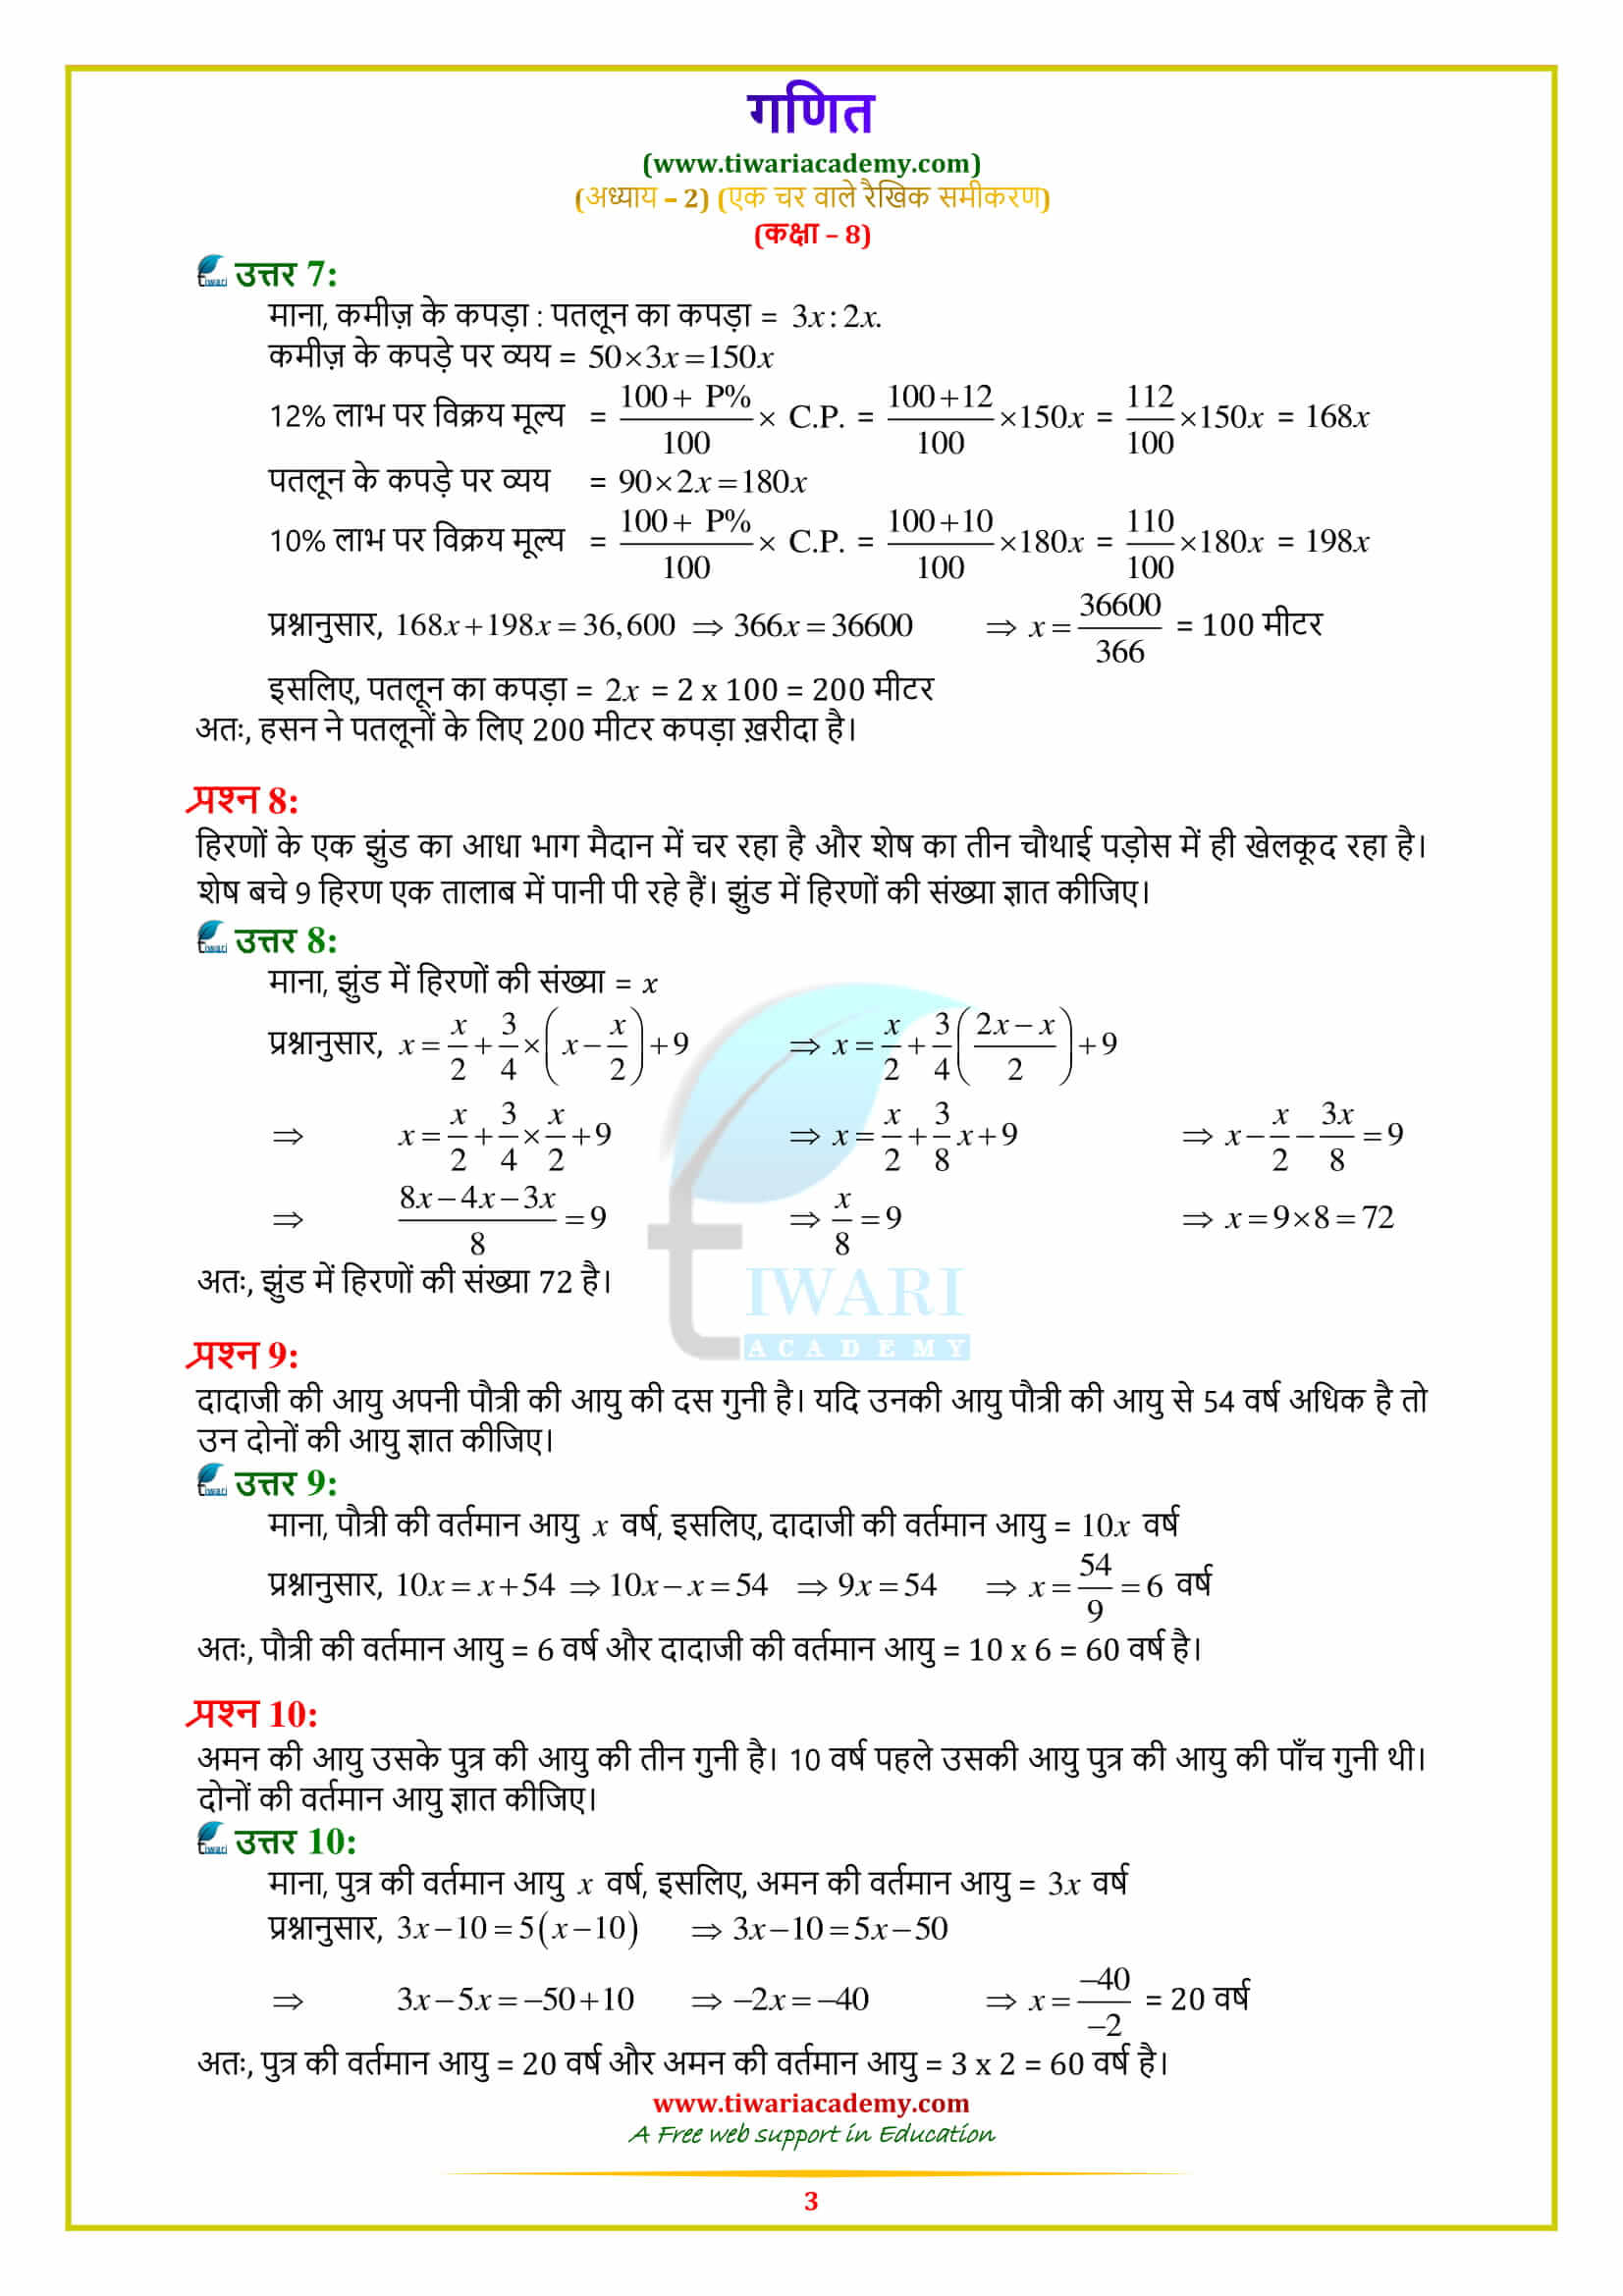 8 Maths Exercise 2.4 Solutions in pdf guide